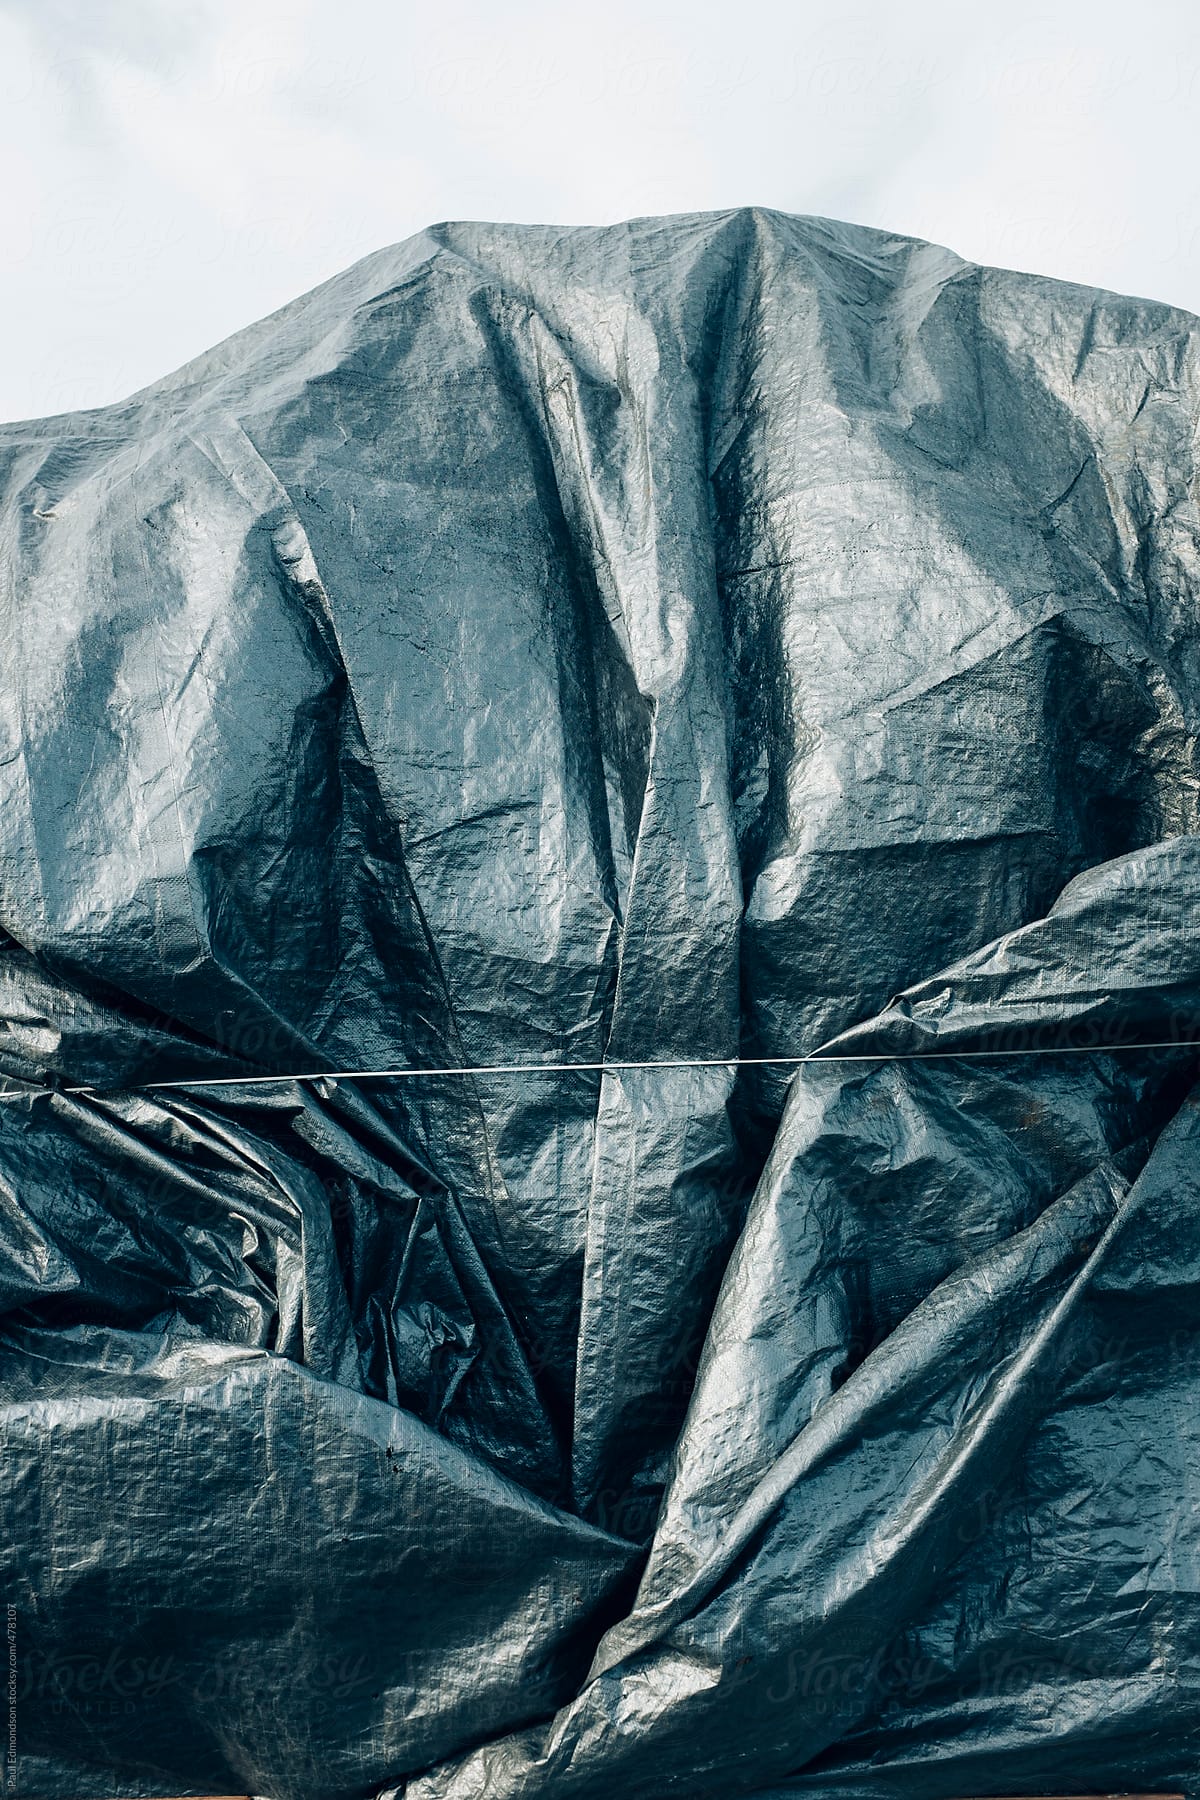 Silver tarpaulin covering pile of commercial fishing equipment